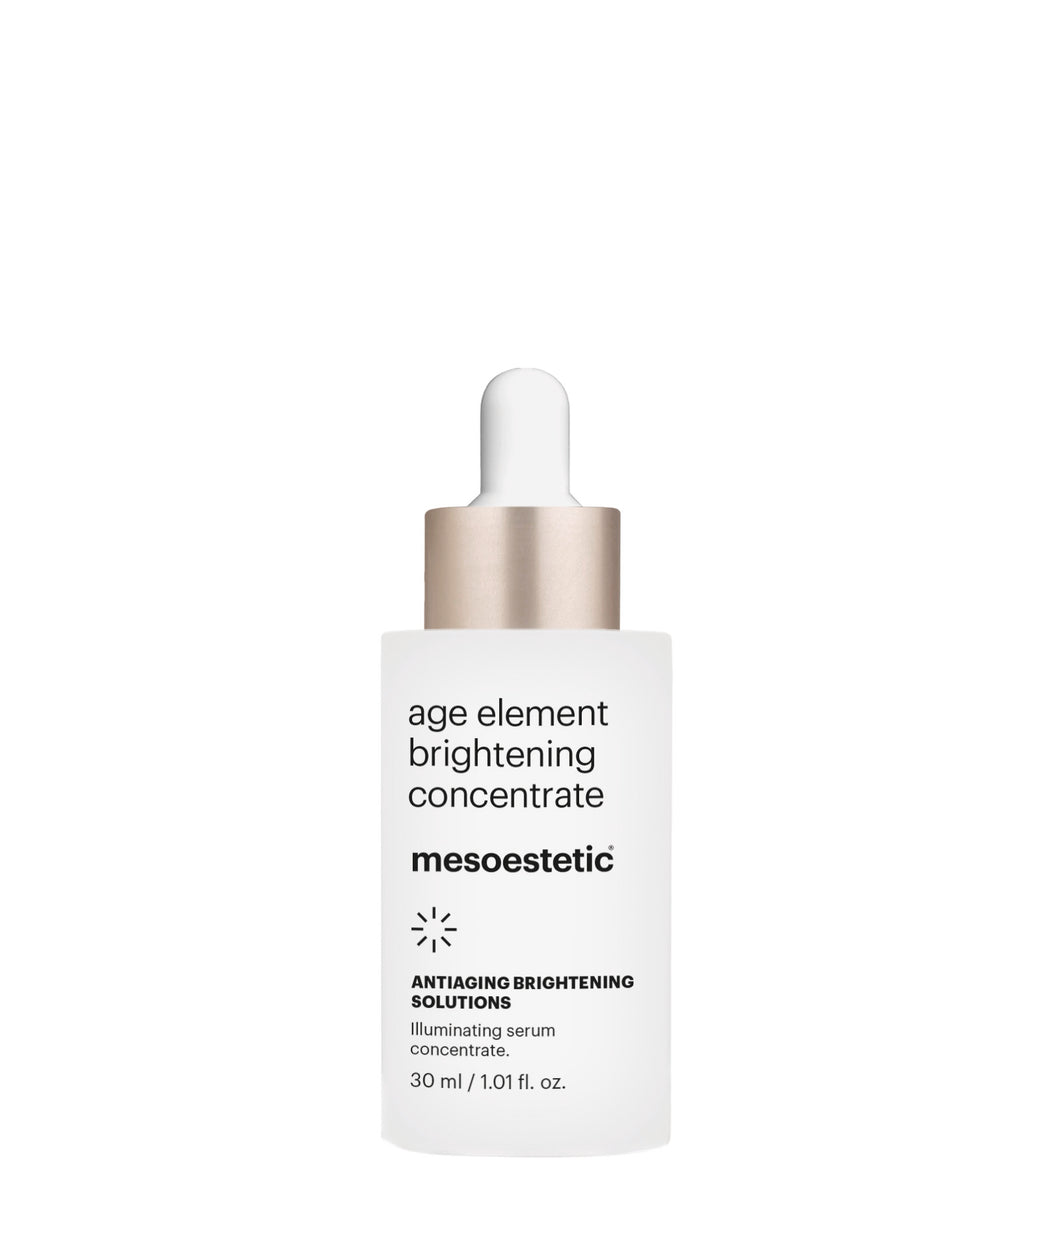 Mesoestetic Age Element brightening concentrate